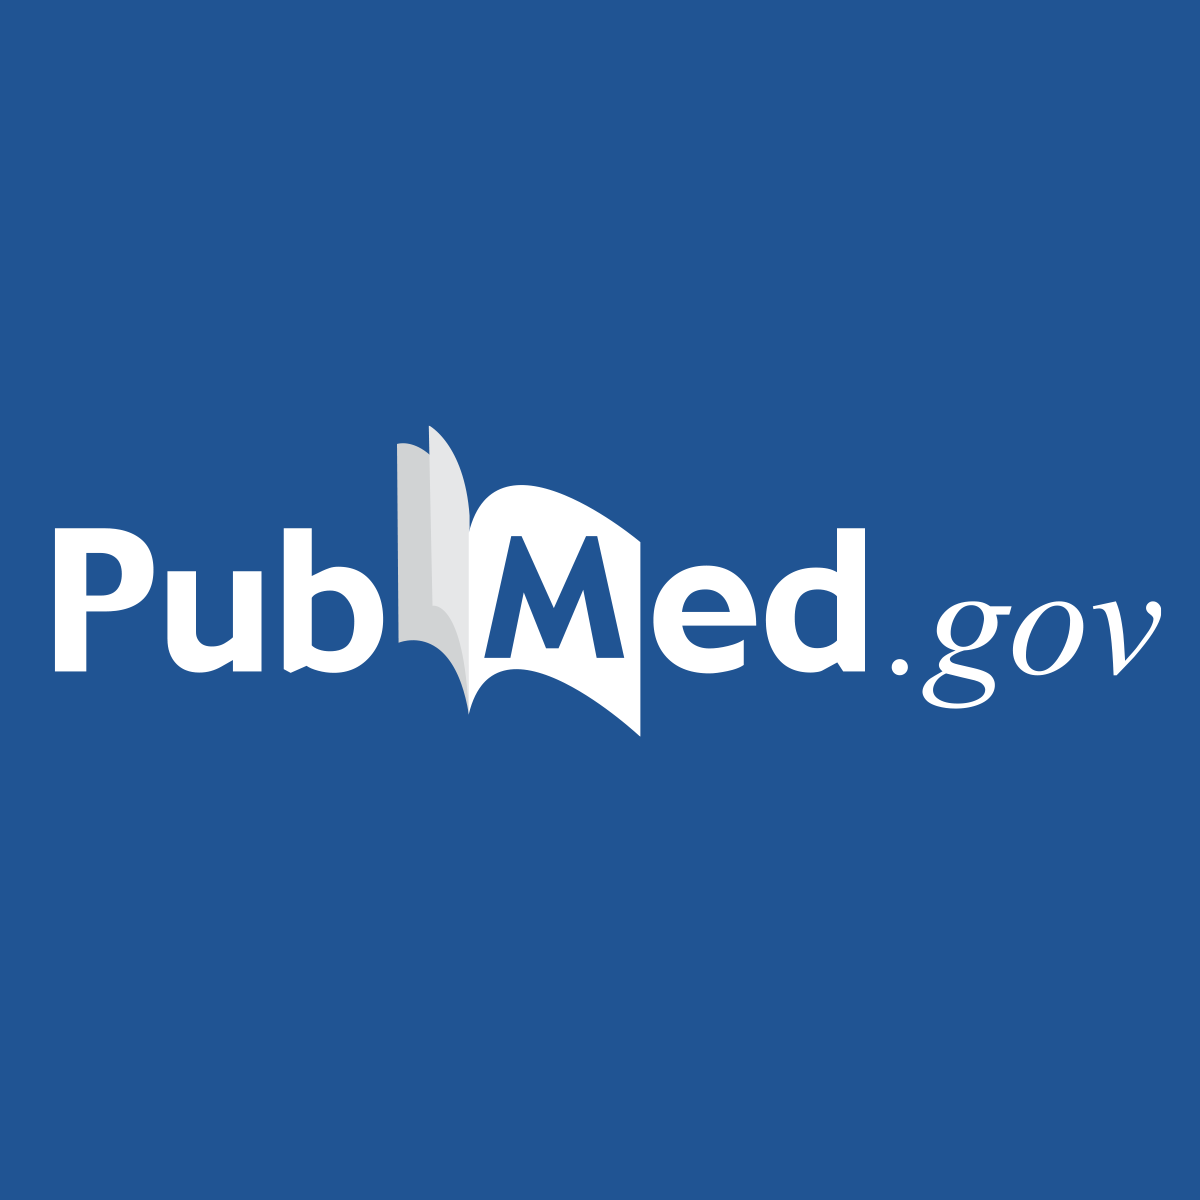 Cuts in cancer research funding due to COVID-19 - PubMed